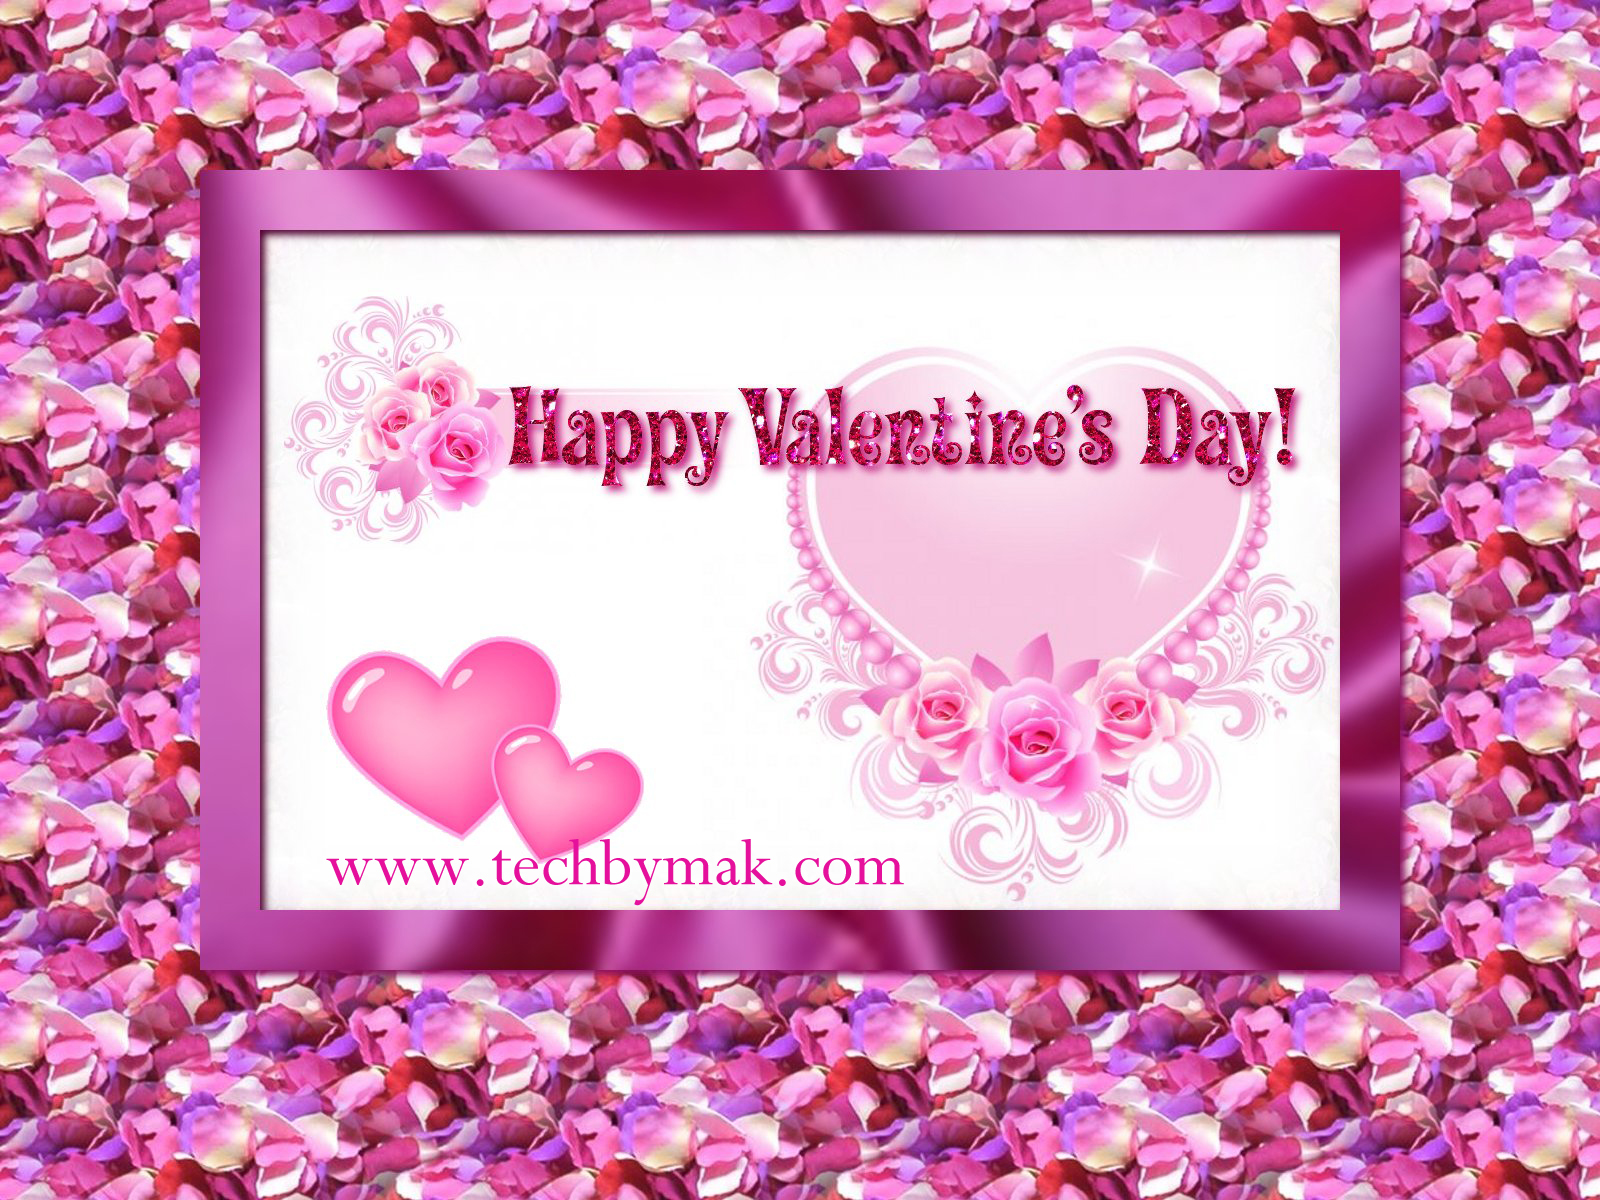 Happy Valentines day Pictures,photos and wallpapers 2016